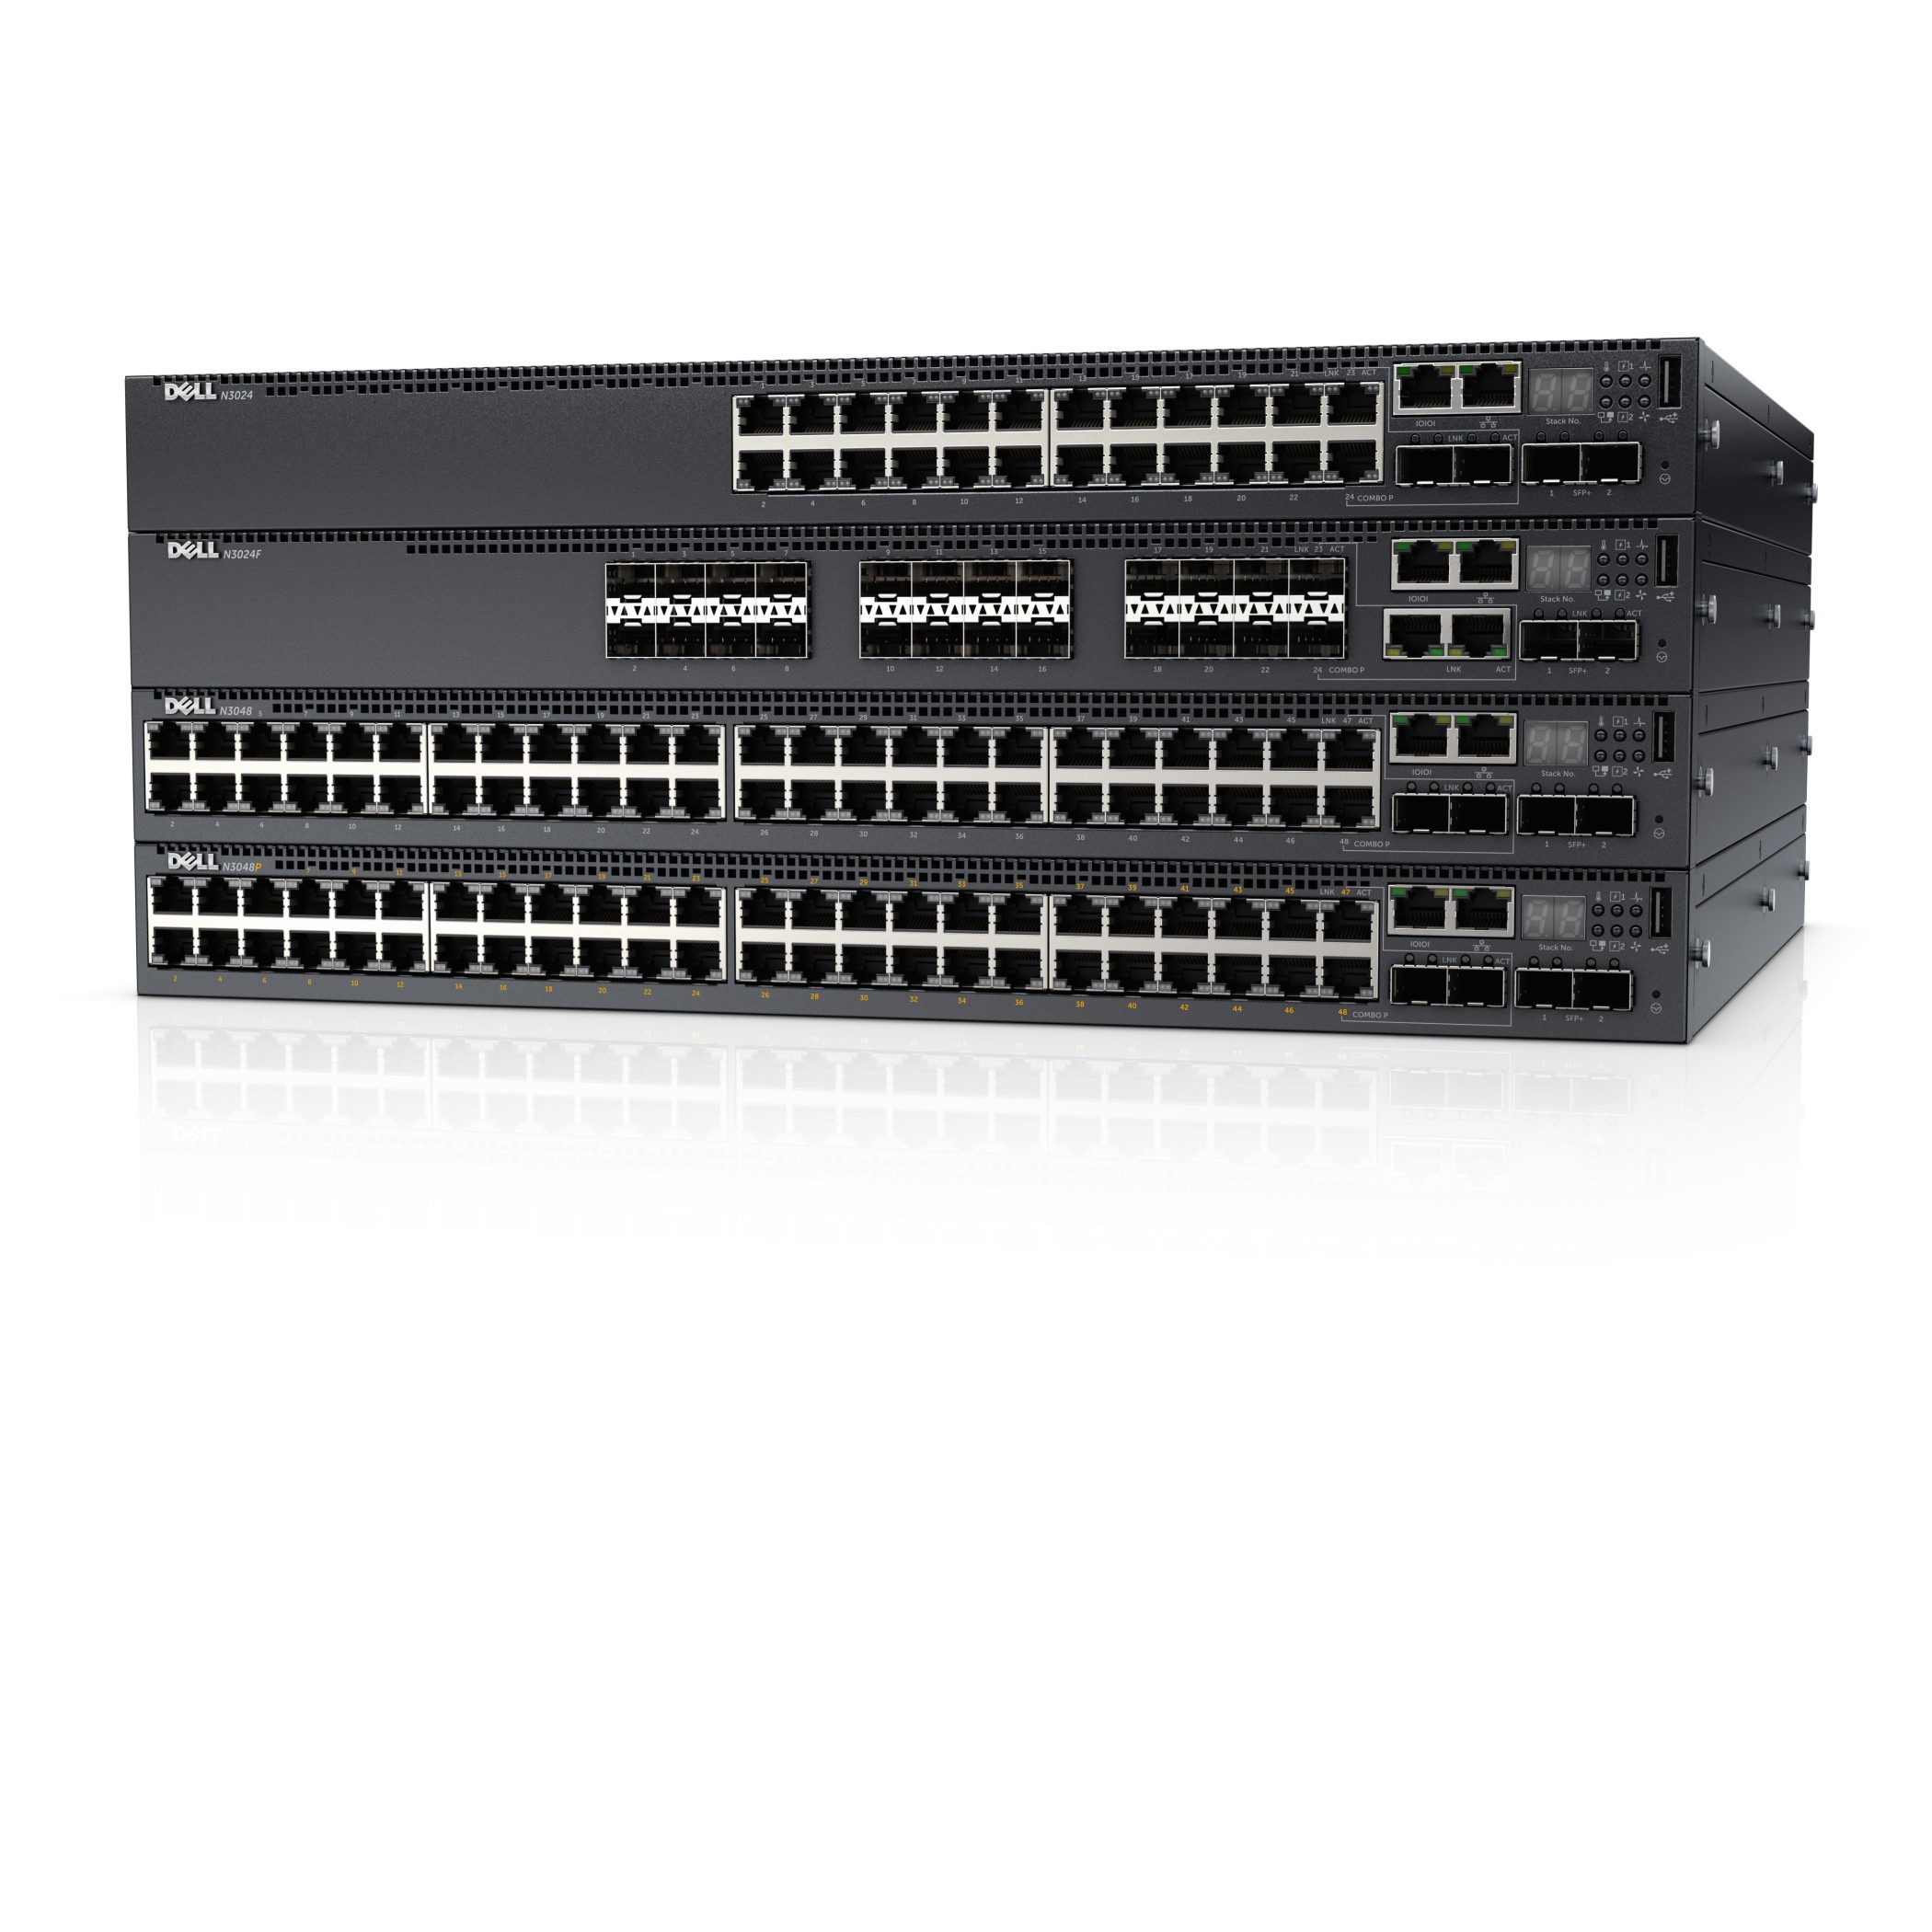 Dell Networking N3000 series